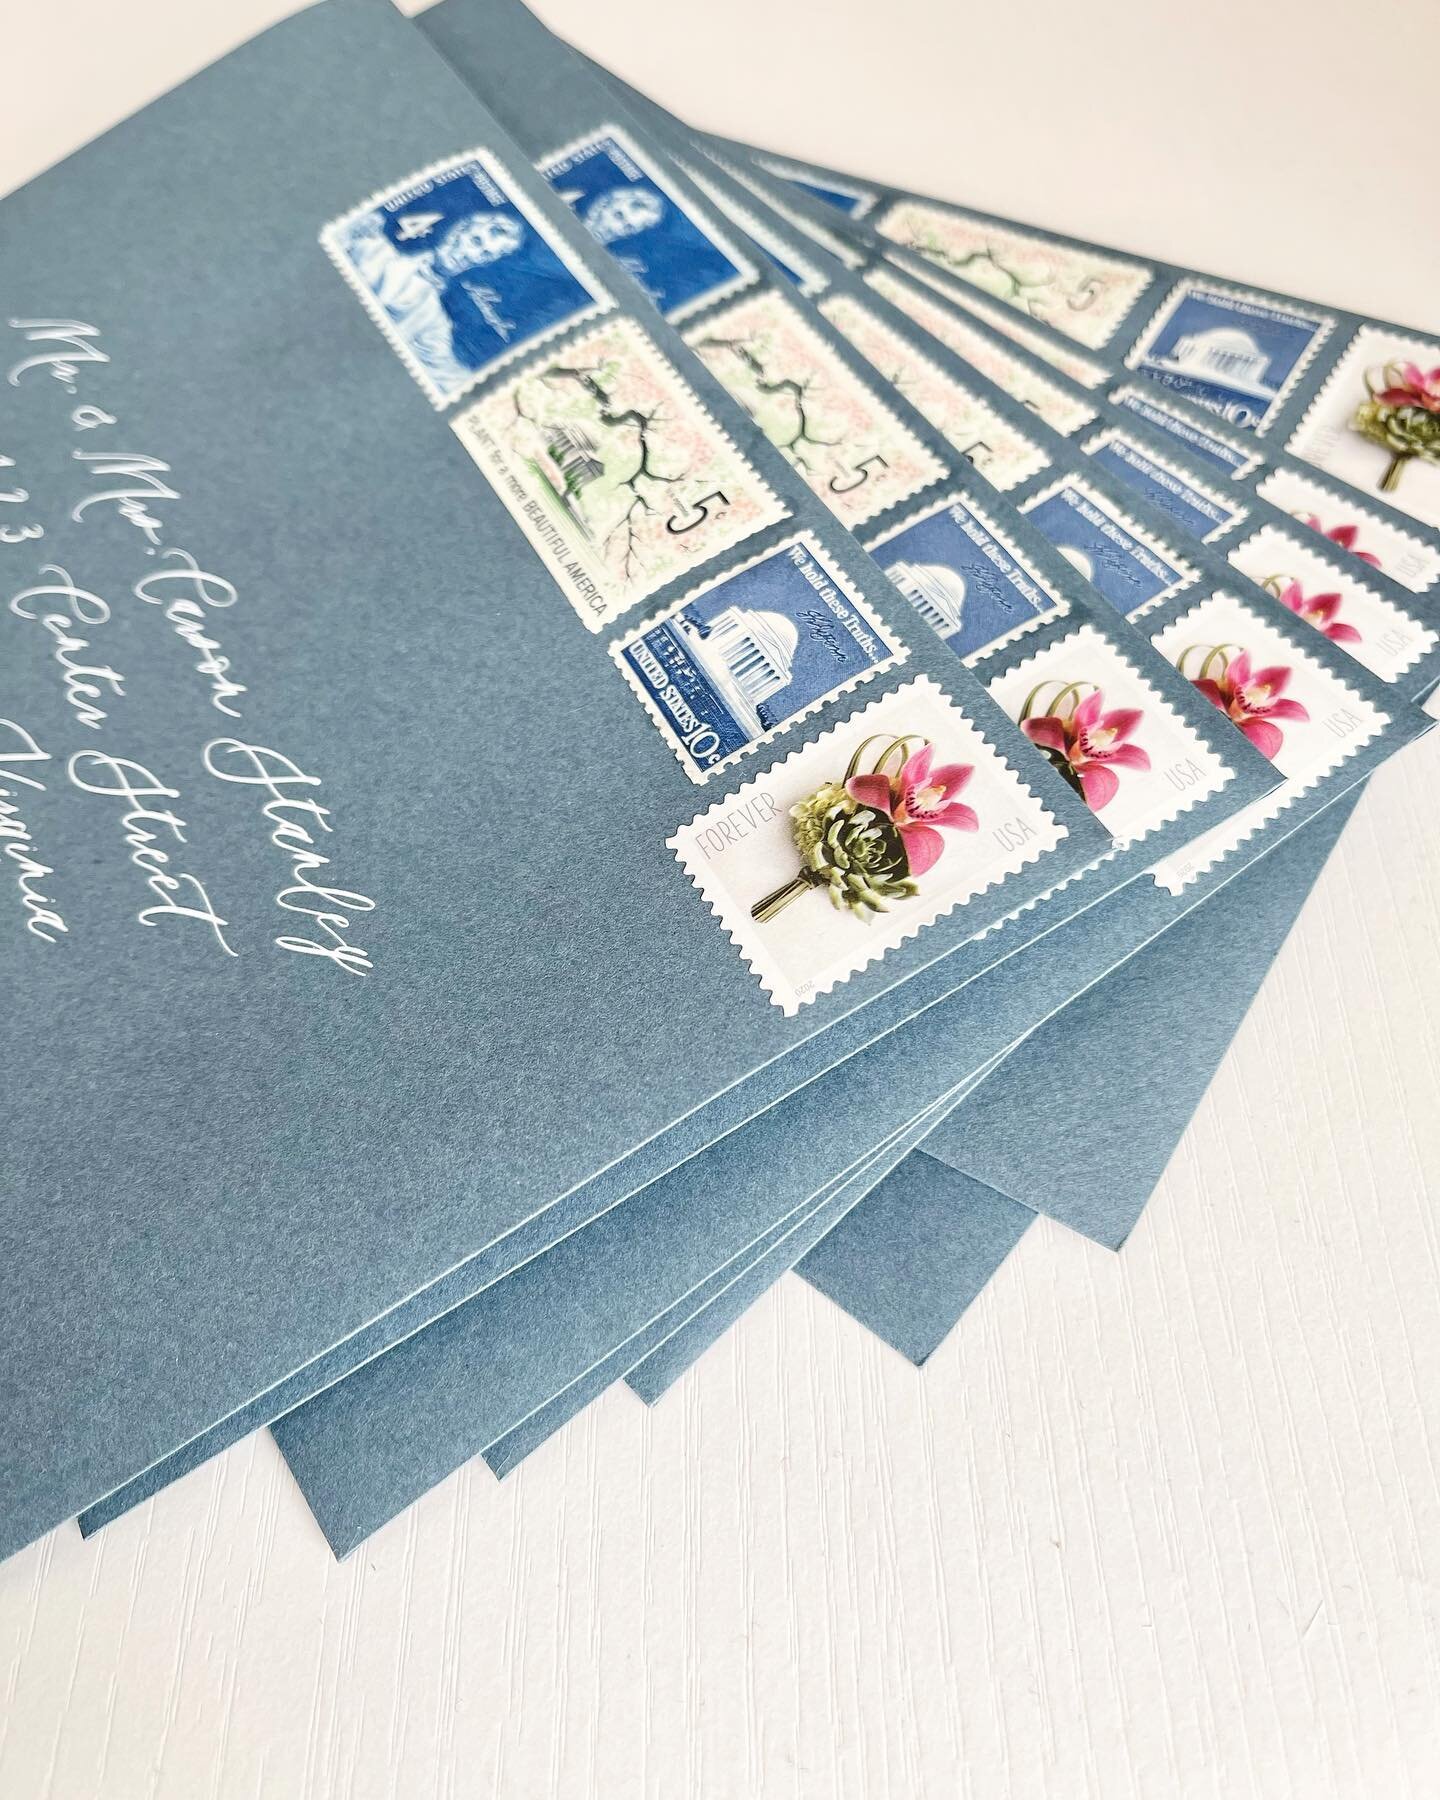 Dusty blue envelopes with vintage DC stamps!
.
.
.
.
.
#custominvitations #bespokestationery #weddinginvitations #dcwedding #engaged #weddingstationery #dcbride #weddinginvite #dcweddinginvitation #dustybluewedding